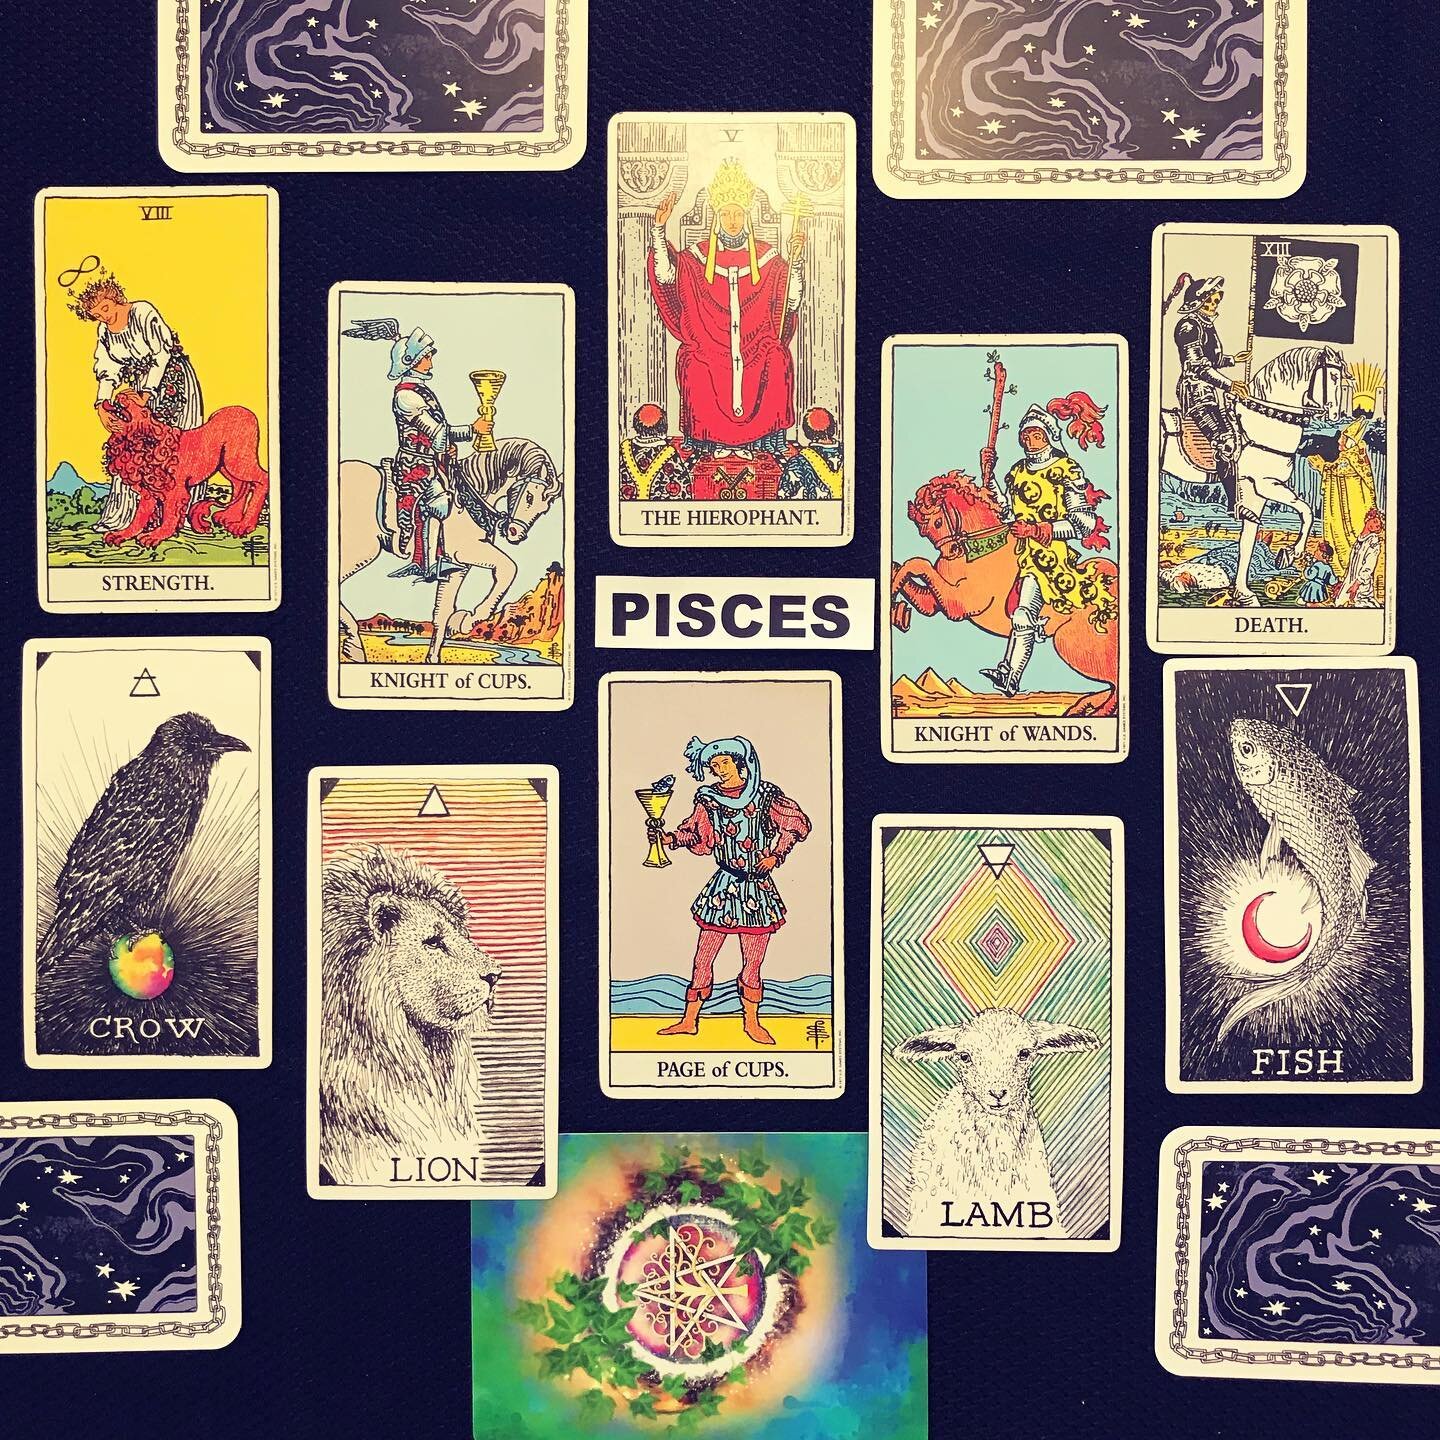 Hello Tarot Fam@🌻 3 BRAND NEW TAROT READINGS FOR THE WATER SIGNS JUST WENT UP! (Cancer, Scorpio &amp; Pisces) Enjoy and keep an eye out for more coming this week! 🌊 #theintuitiveteacup #watersigns #tarot #tarotcards #tarotreading #tarotreader #taro